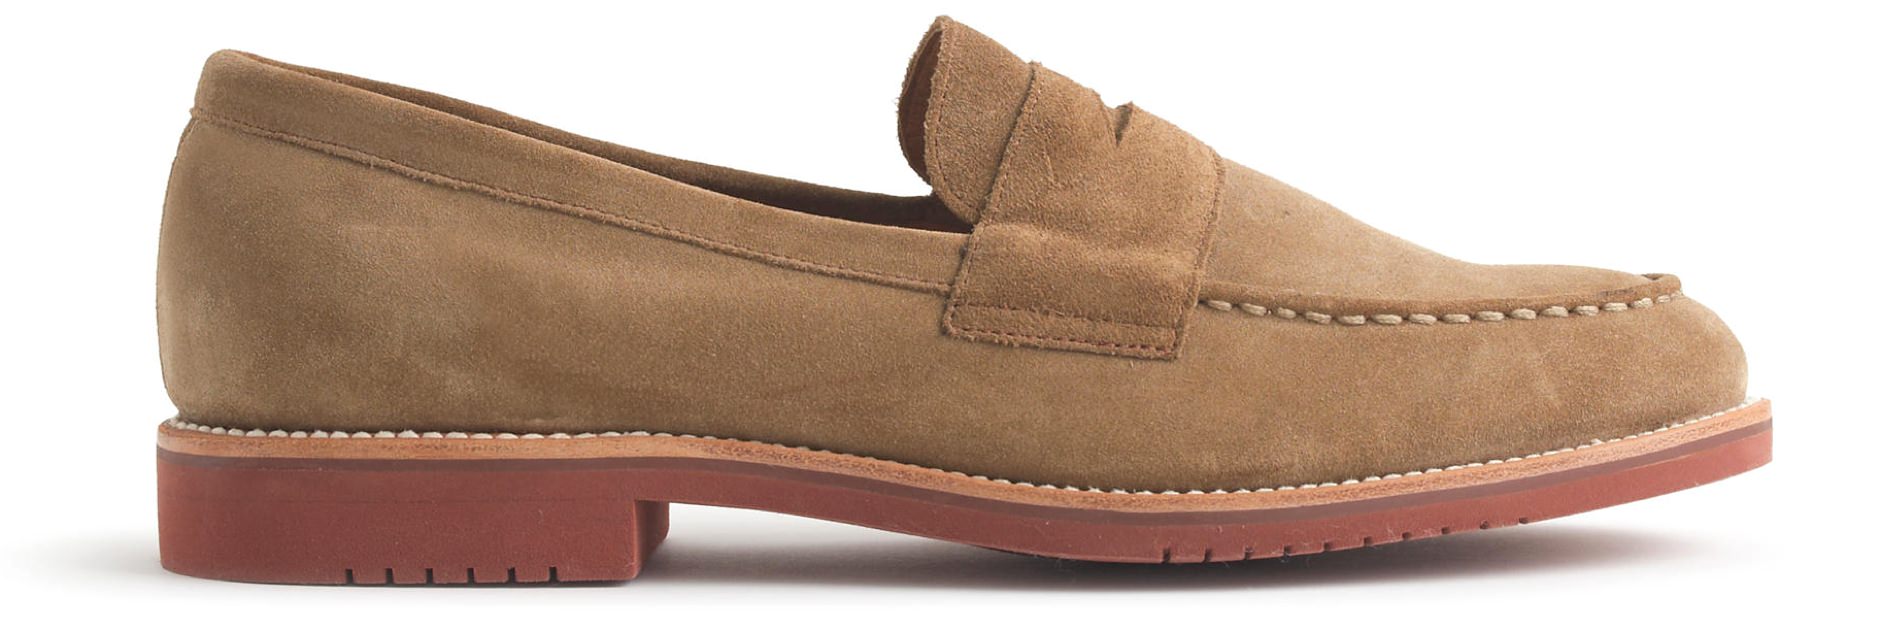 The Best Loafers for Work & Play | Valet.